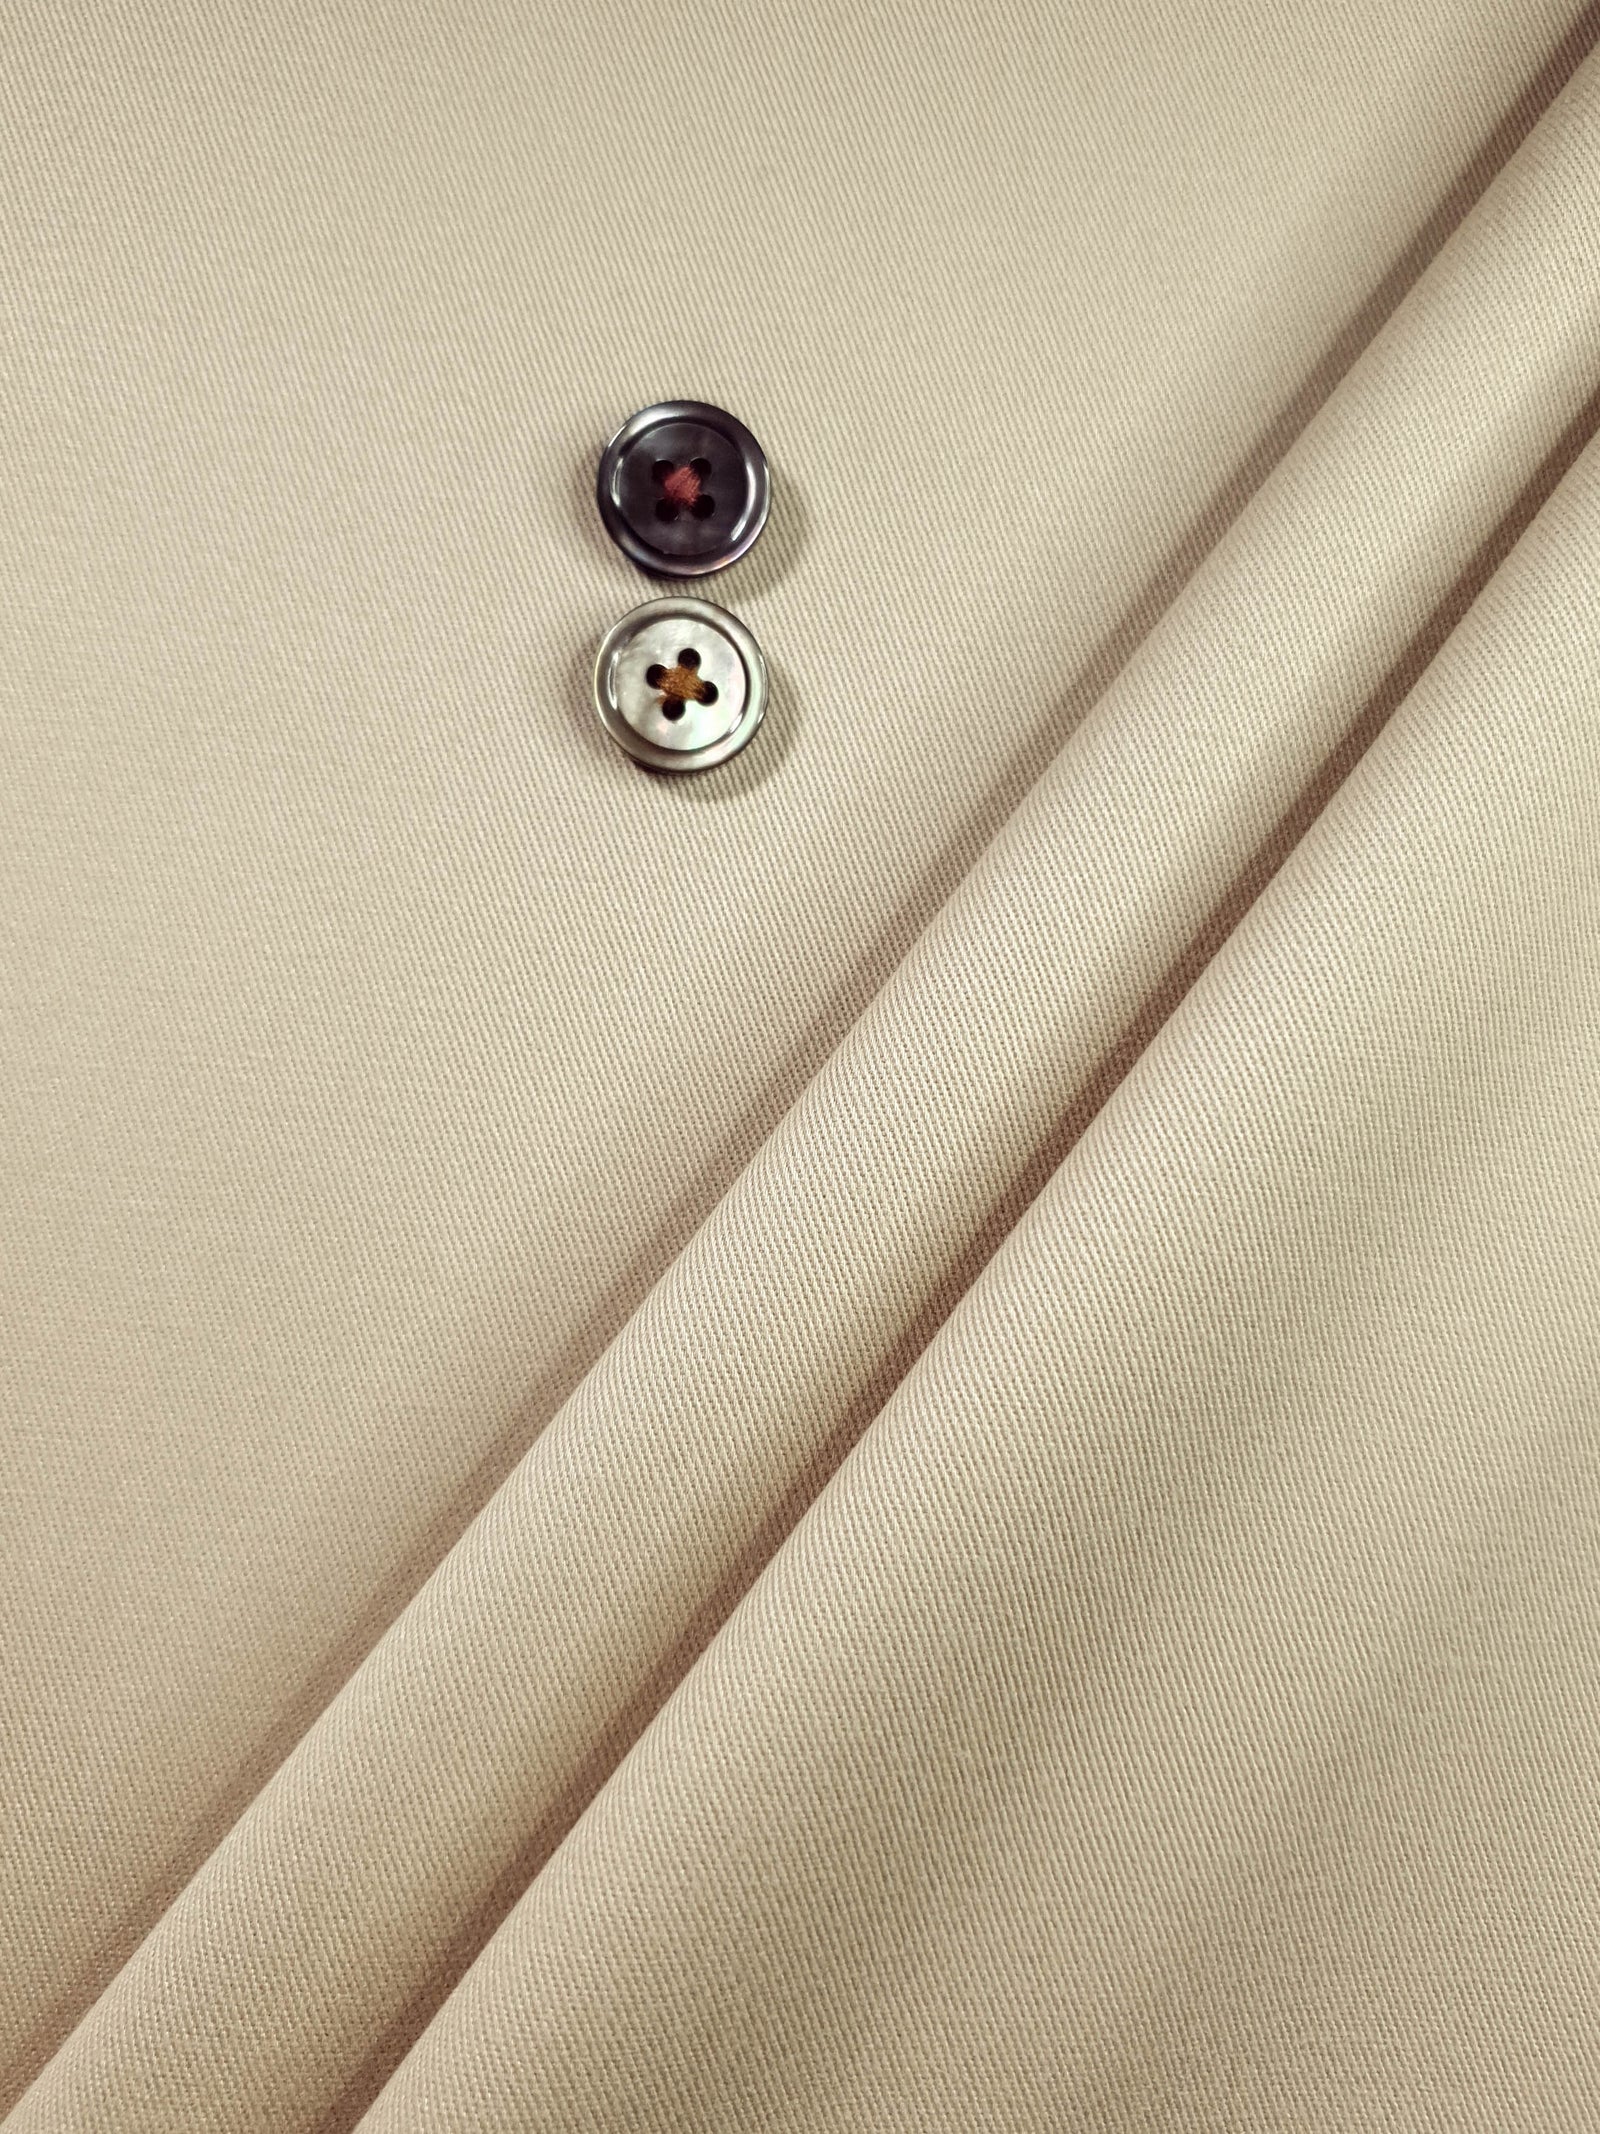 HUBERROSS Khaki Color Brushed Cotton with Stretch  97% Cotton 3% Lycra Cloth Made in Italy